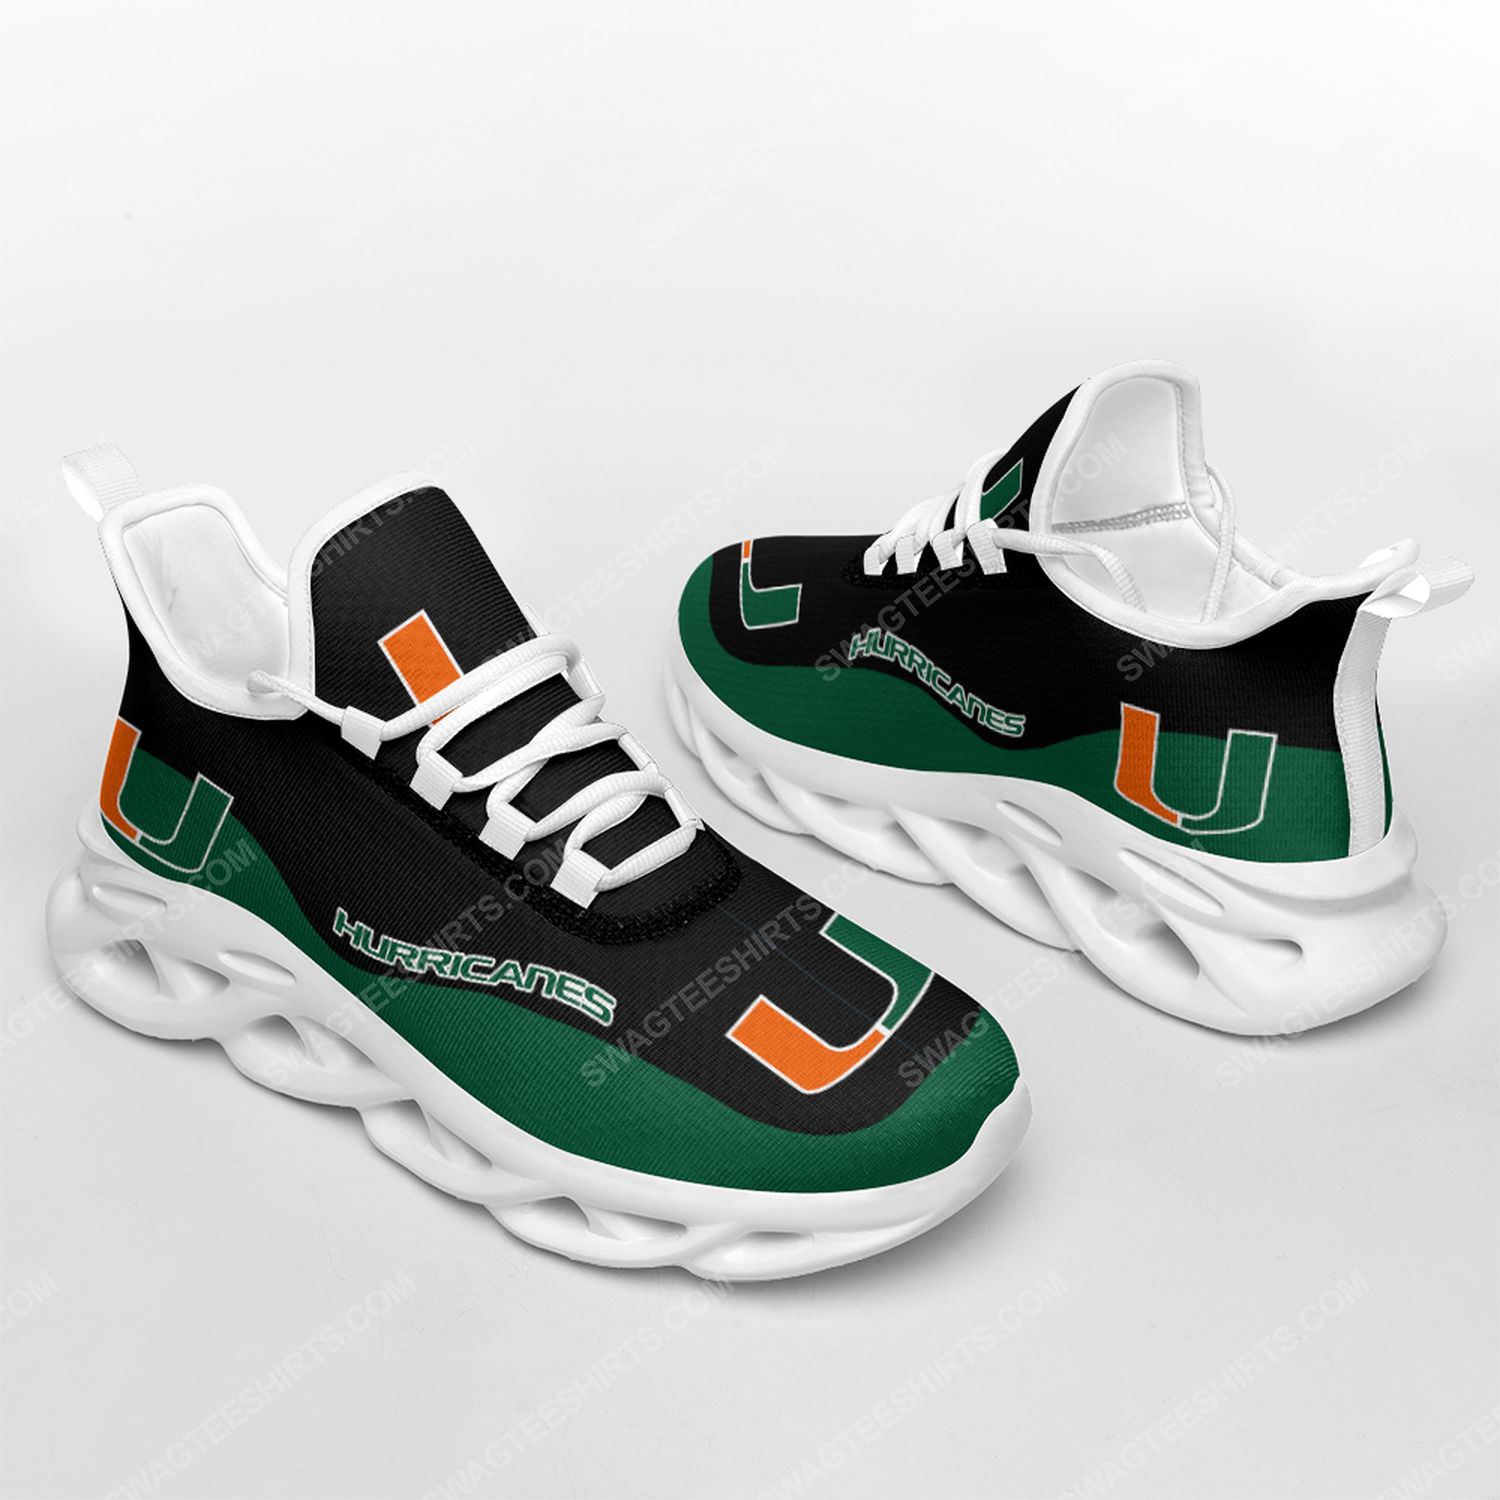 [special edition] The miami hurricanes football team max soul shoes – Maria